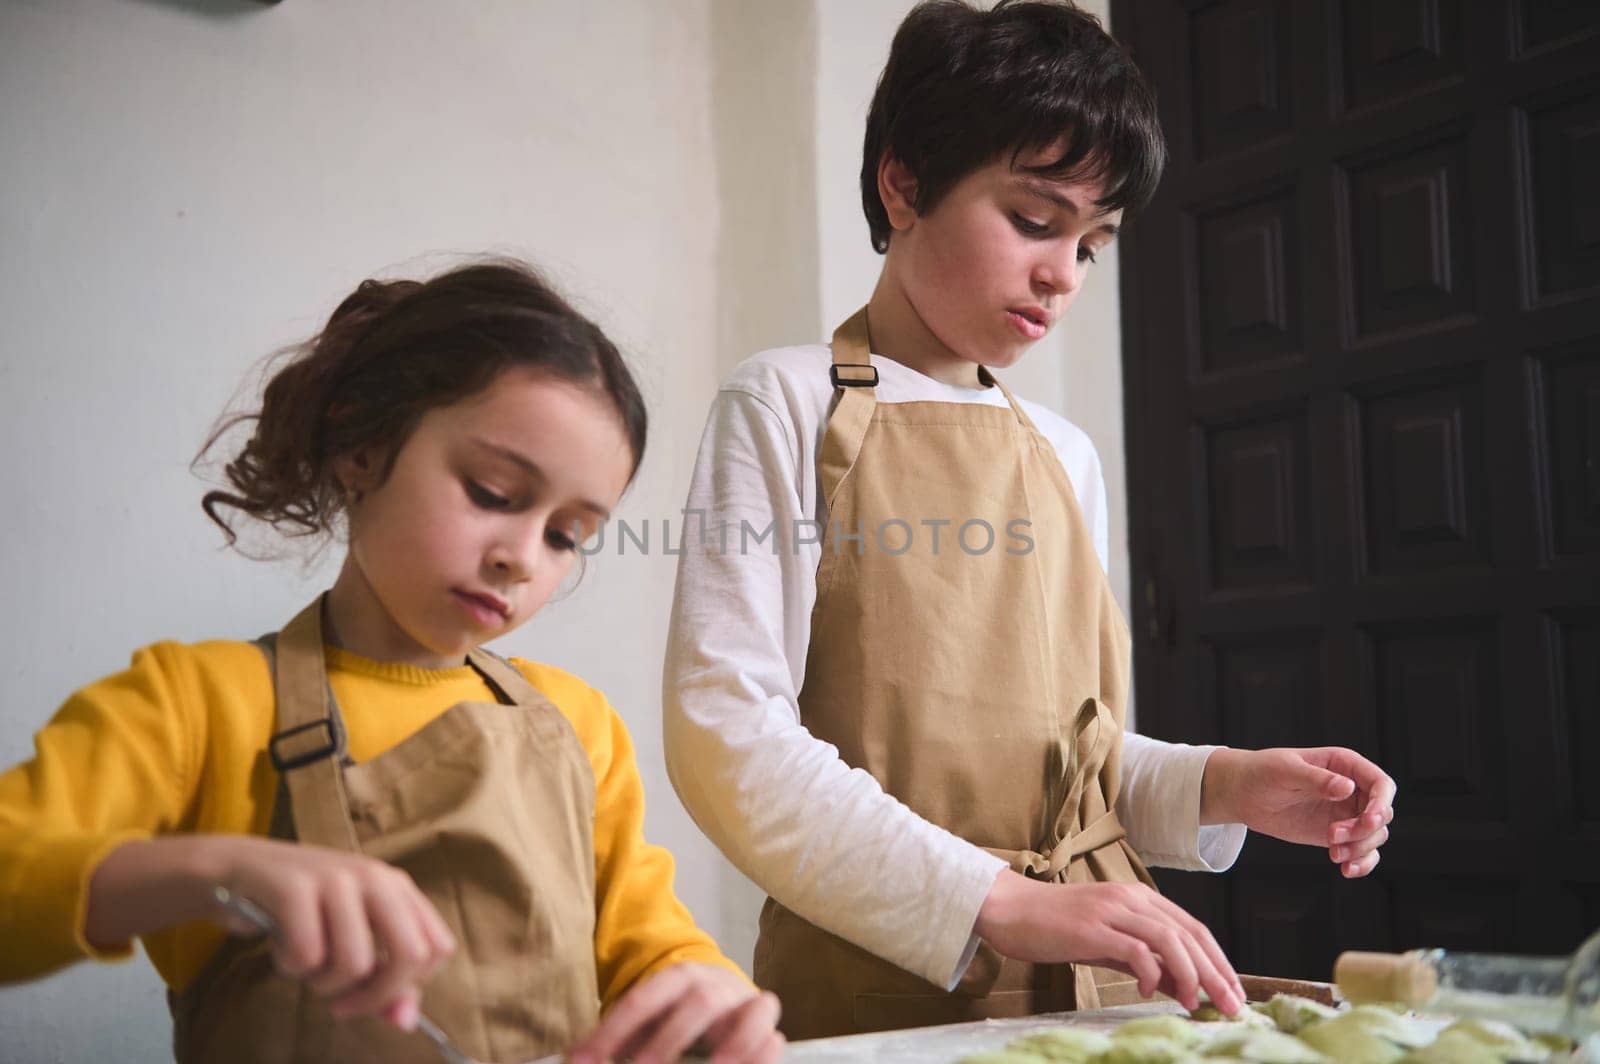 Cute kids boy and girl in the rural kitchen, sculpting dumplings from dough with mashed potatoes filling. Cooking homemade dumplings, Italian ravioli or Ukrainian varenyky according traditional recipe